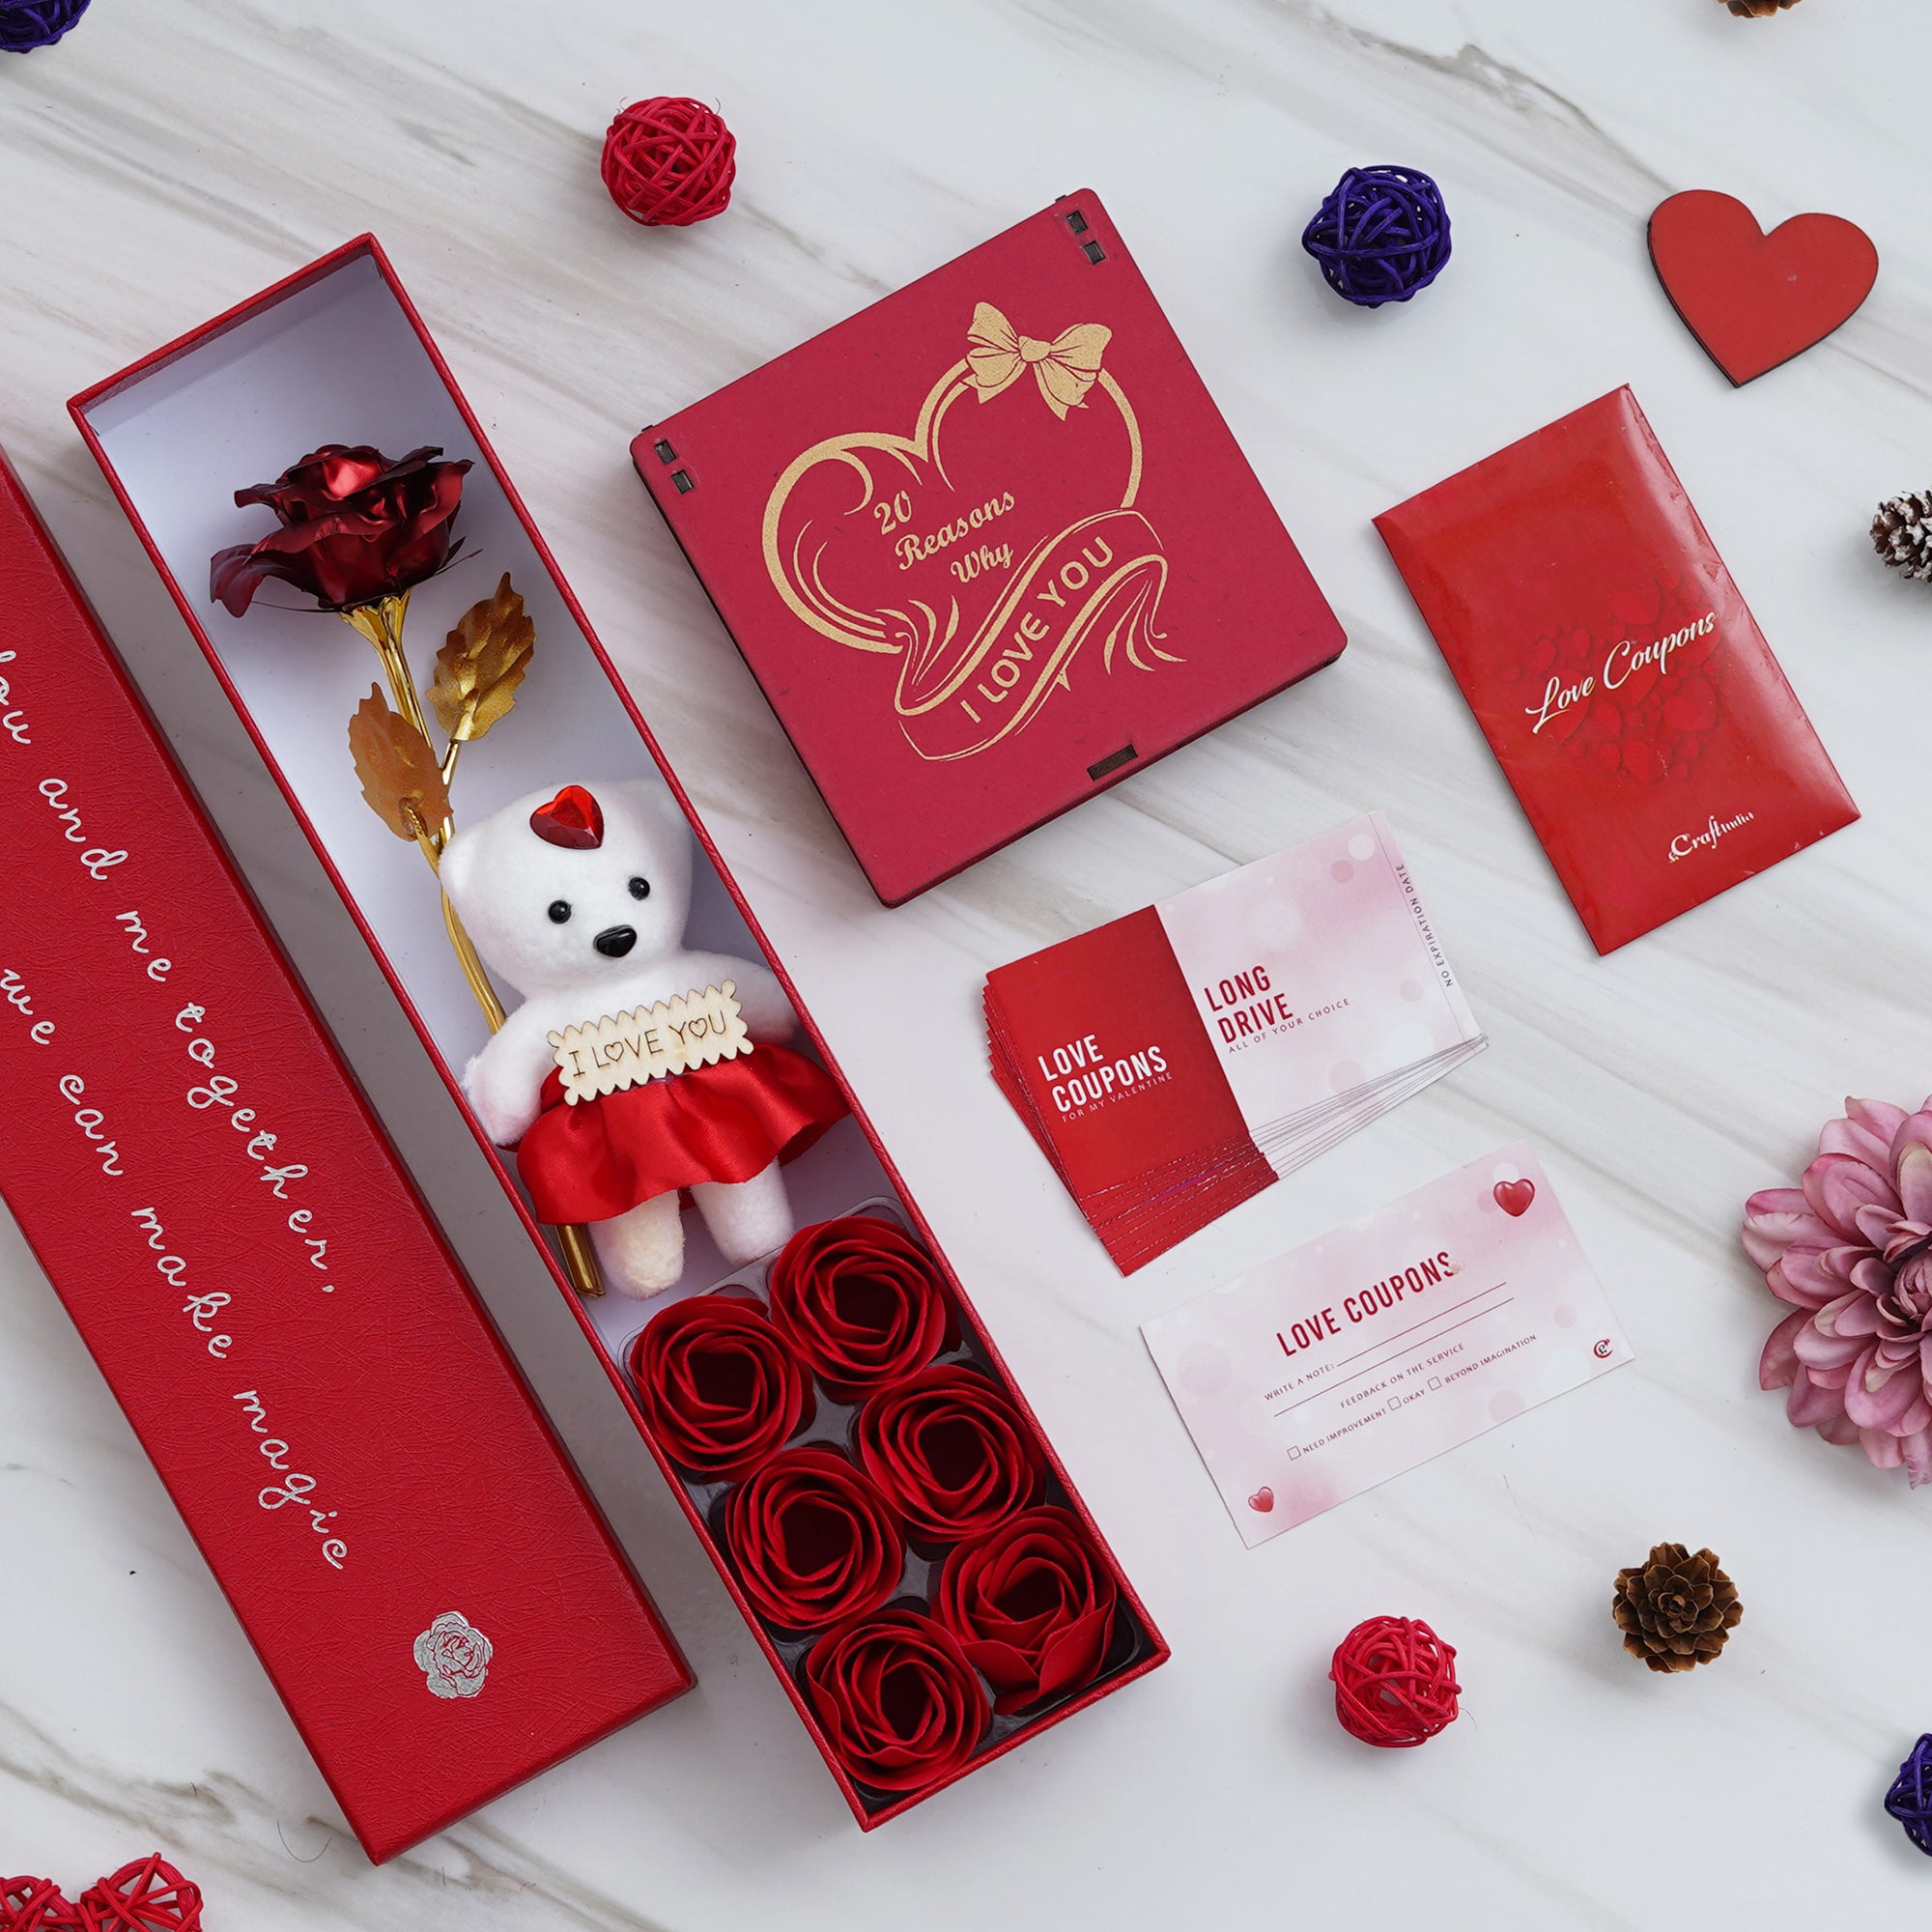 Valentine Combo of Pack of 12 Love Coupons Gift Cards Set, Red Gift Box with Teddy & Roses, "20 Reasons Why I Love You" Printed on Little Red Hearts Decorative Wooden Gift Set Box